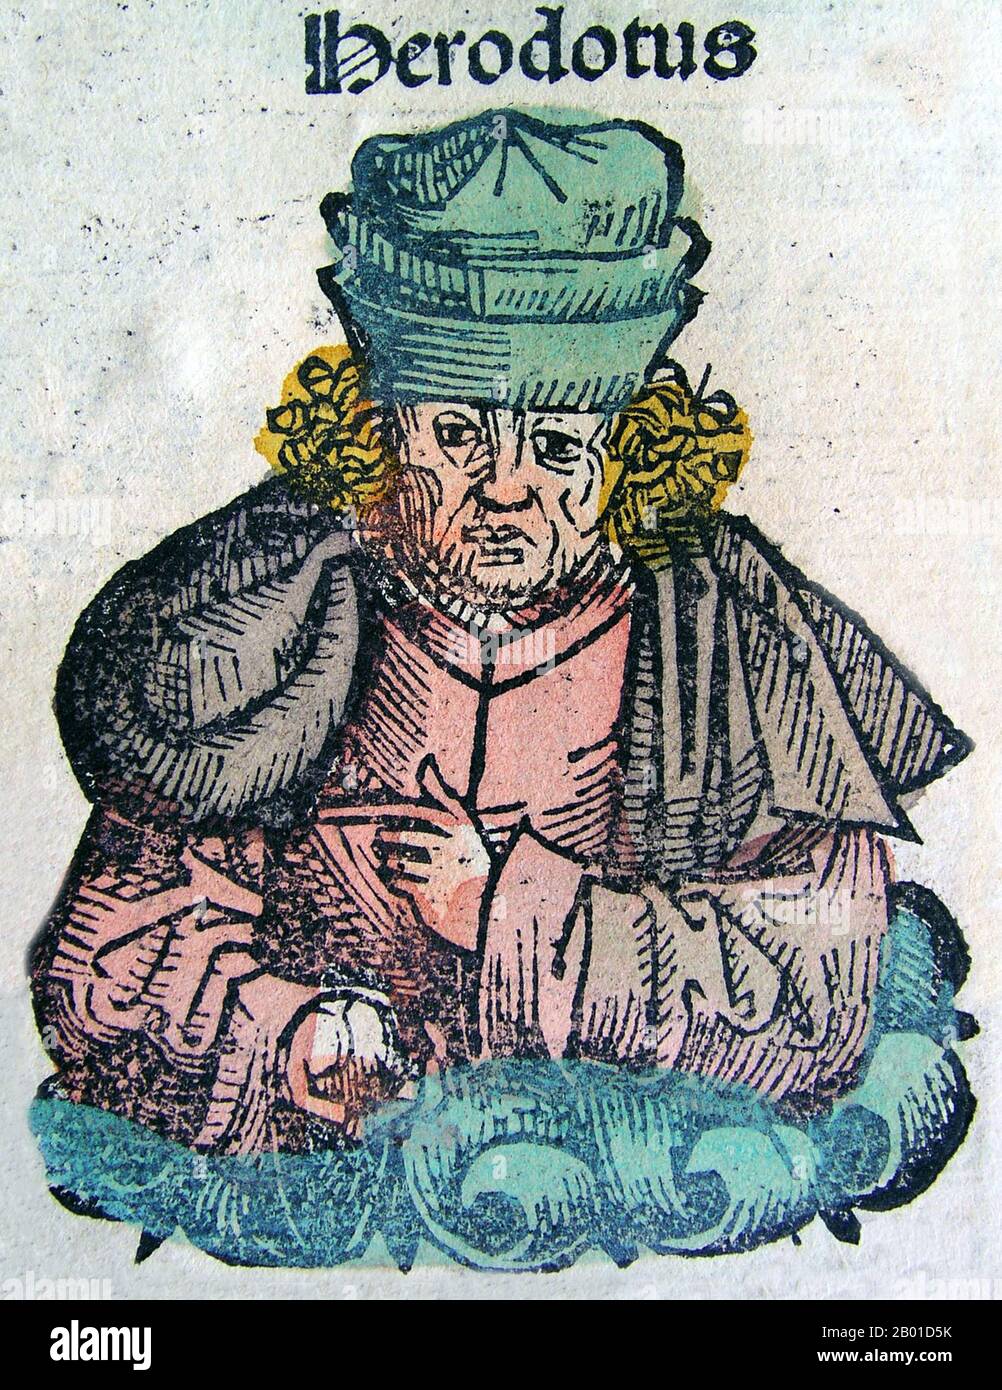 Greece/Turkey: Herodotus (c. 484 - c. 425 BCE), the 'Father of History', as depicted in the Nuremberg Chronicle by Michael Wolgemut (1434-1519) & Wilhelm Playdenwurff (1460-1494), 1493.  Herodotus (Greek: Hēródotos) was an ancient Greek historian who was born in Halicarnassus, Caria (modern day Bodrum, Turkey) and lived in the 5th century BCE.  He has been called the 'Father of History' since he was the first historian known to collect his materials systematically, test their accuracy to a certain extent and arrange them in a well-constructed and vivid narrative. Stock Photo